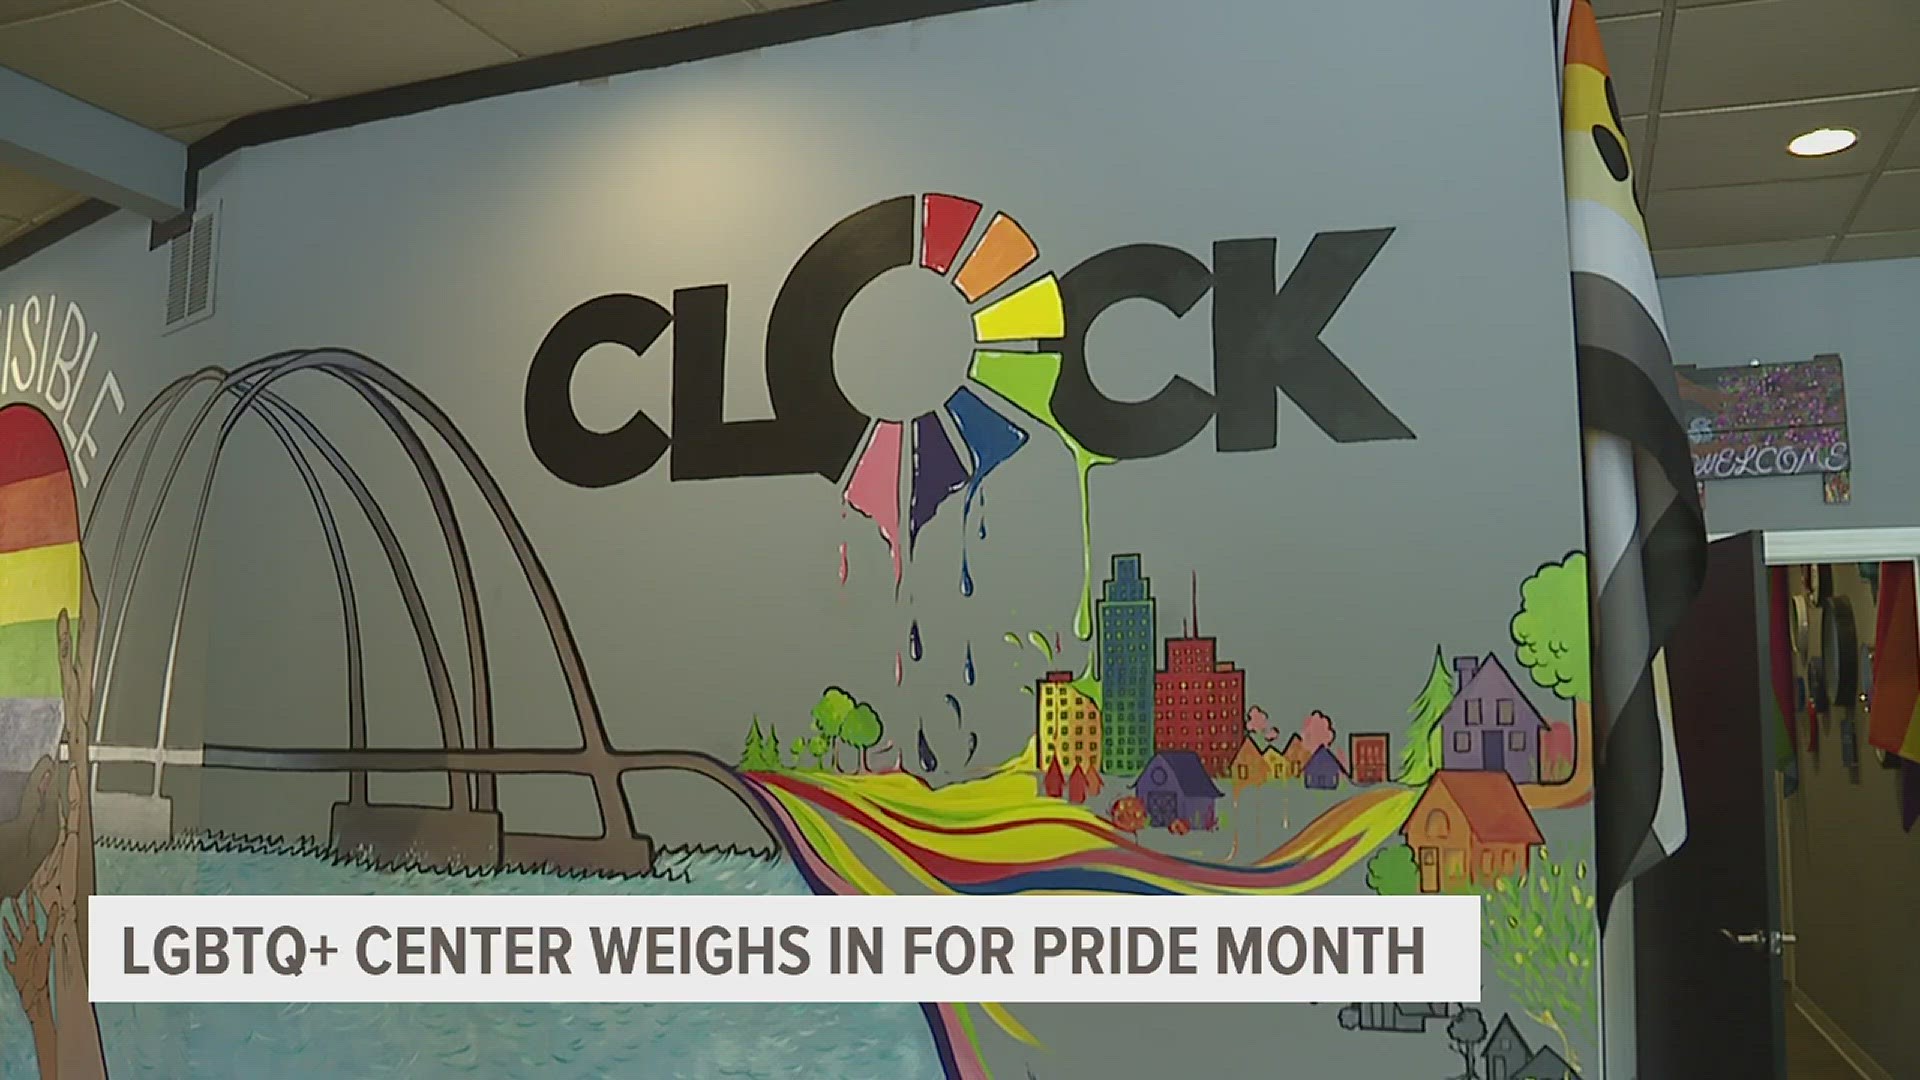 Executive Director of Clock, Inc., LGBTQ+ Community Center Chase Norris says one of the biggest issues surrounding the LGBTQ+ community is people being uninformed.